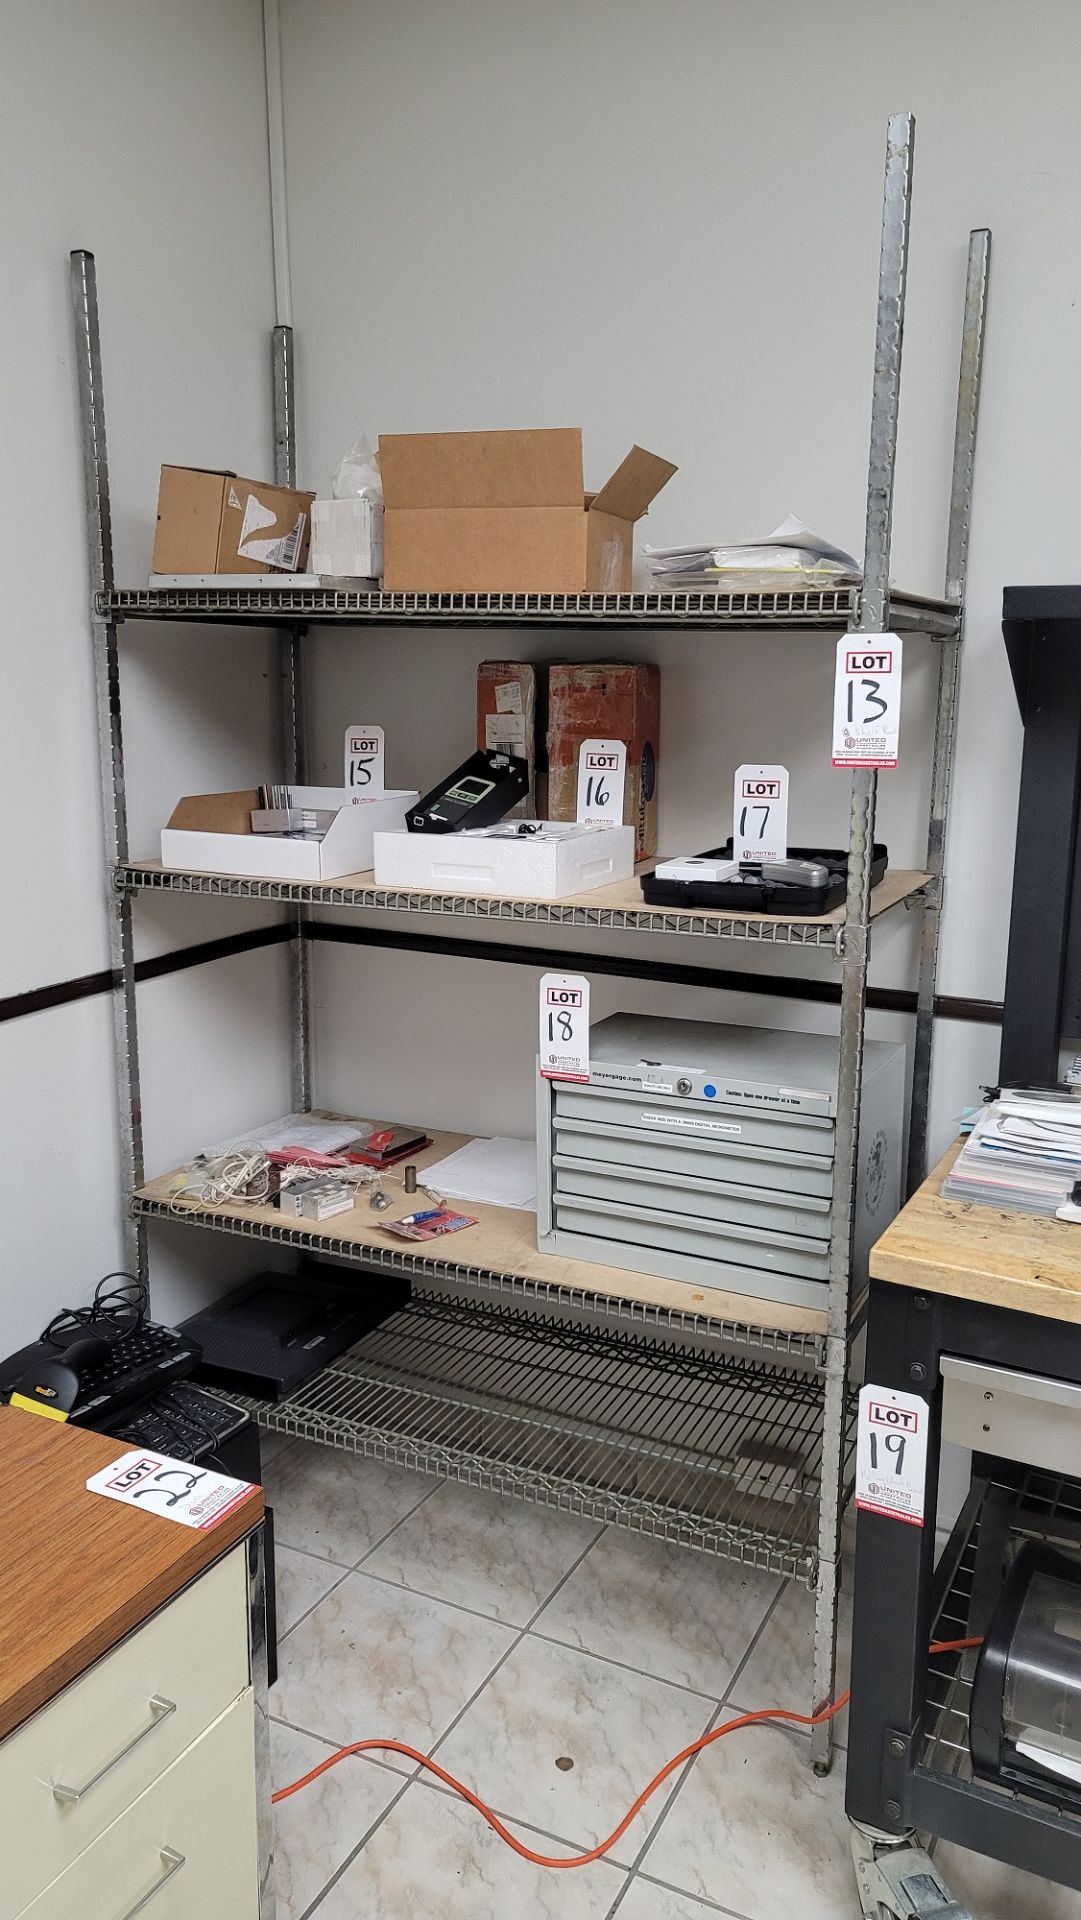 METAL SHELF, 7' X 48" X 18", CONTENTS NOT INCLUDED, **IMMEX REGISTERED EQUIPMENT (NEEDS TO RETURN TO